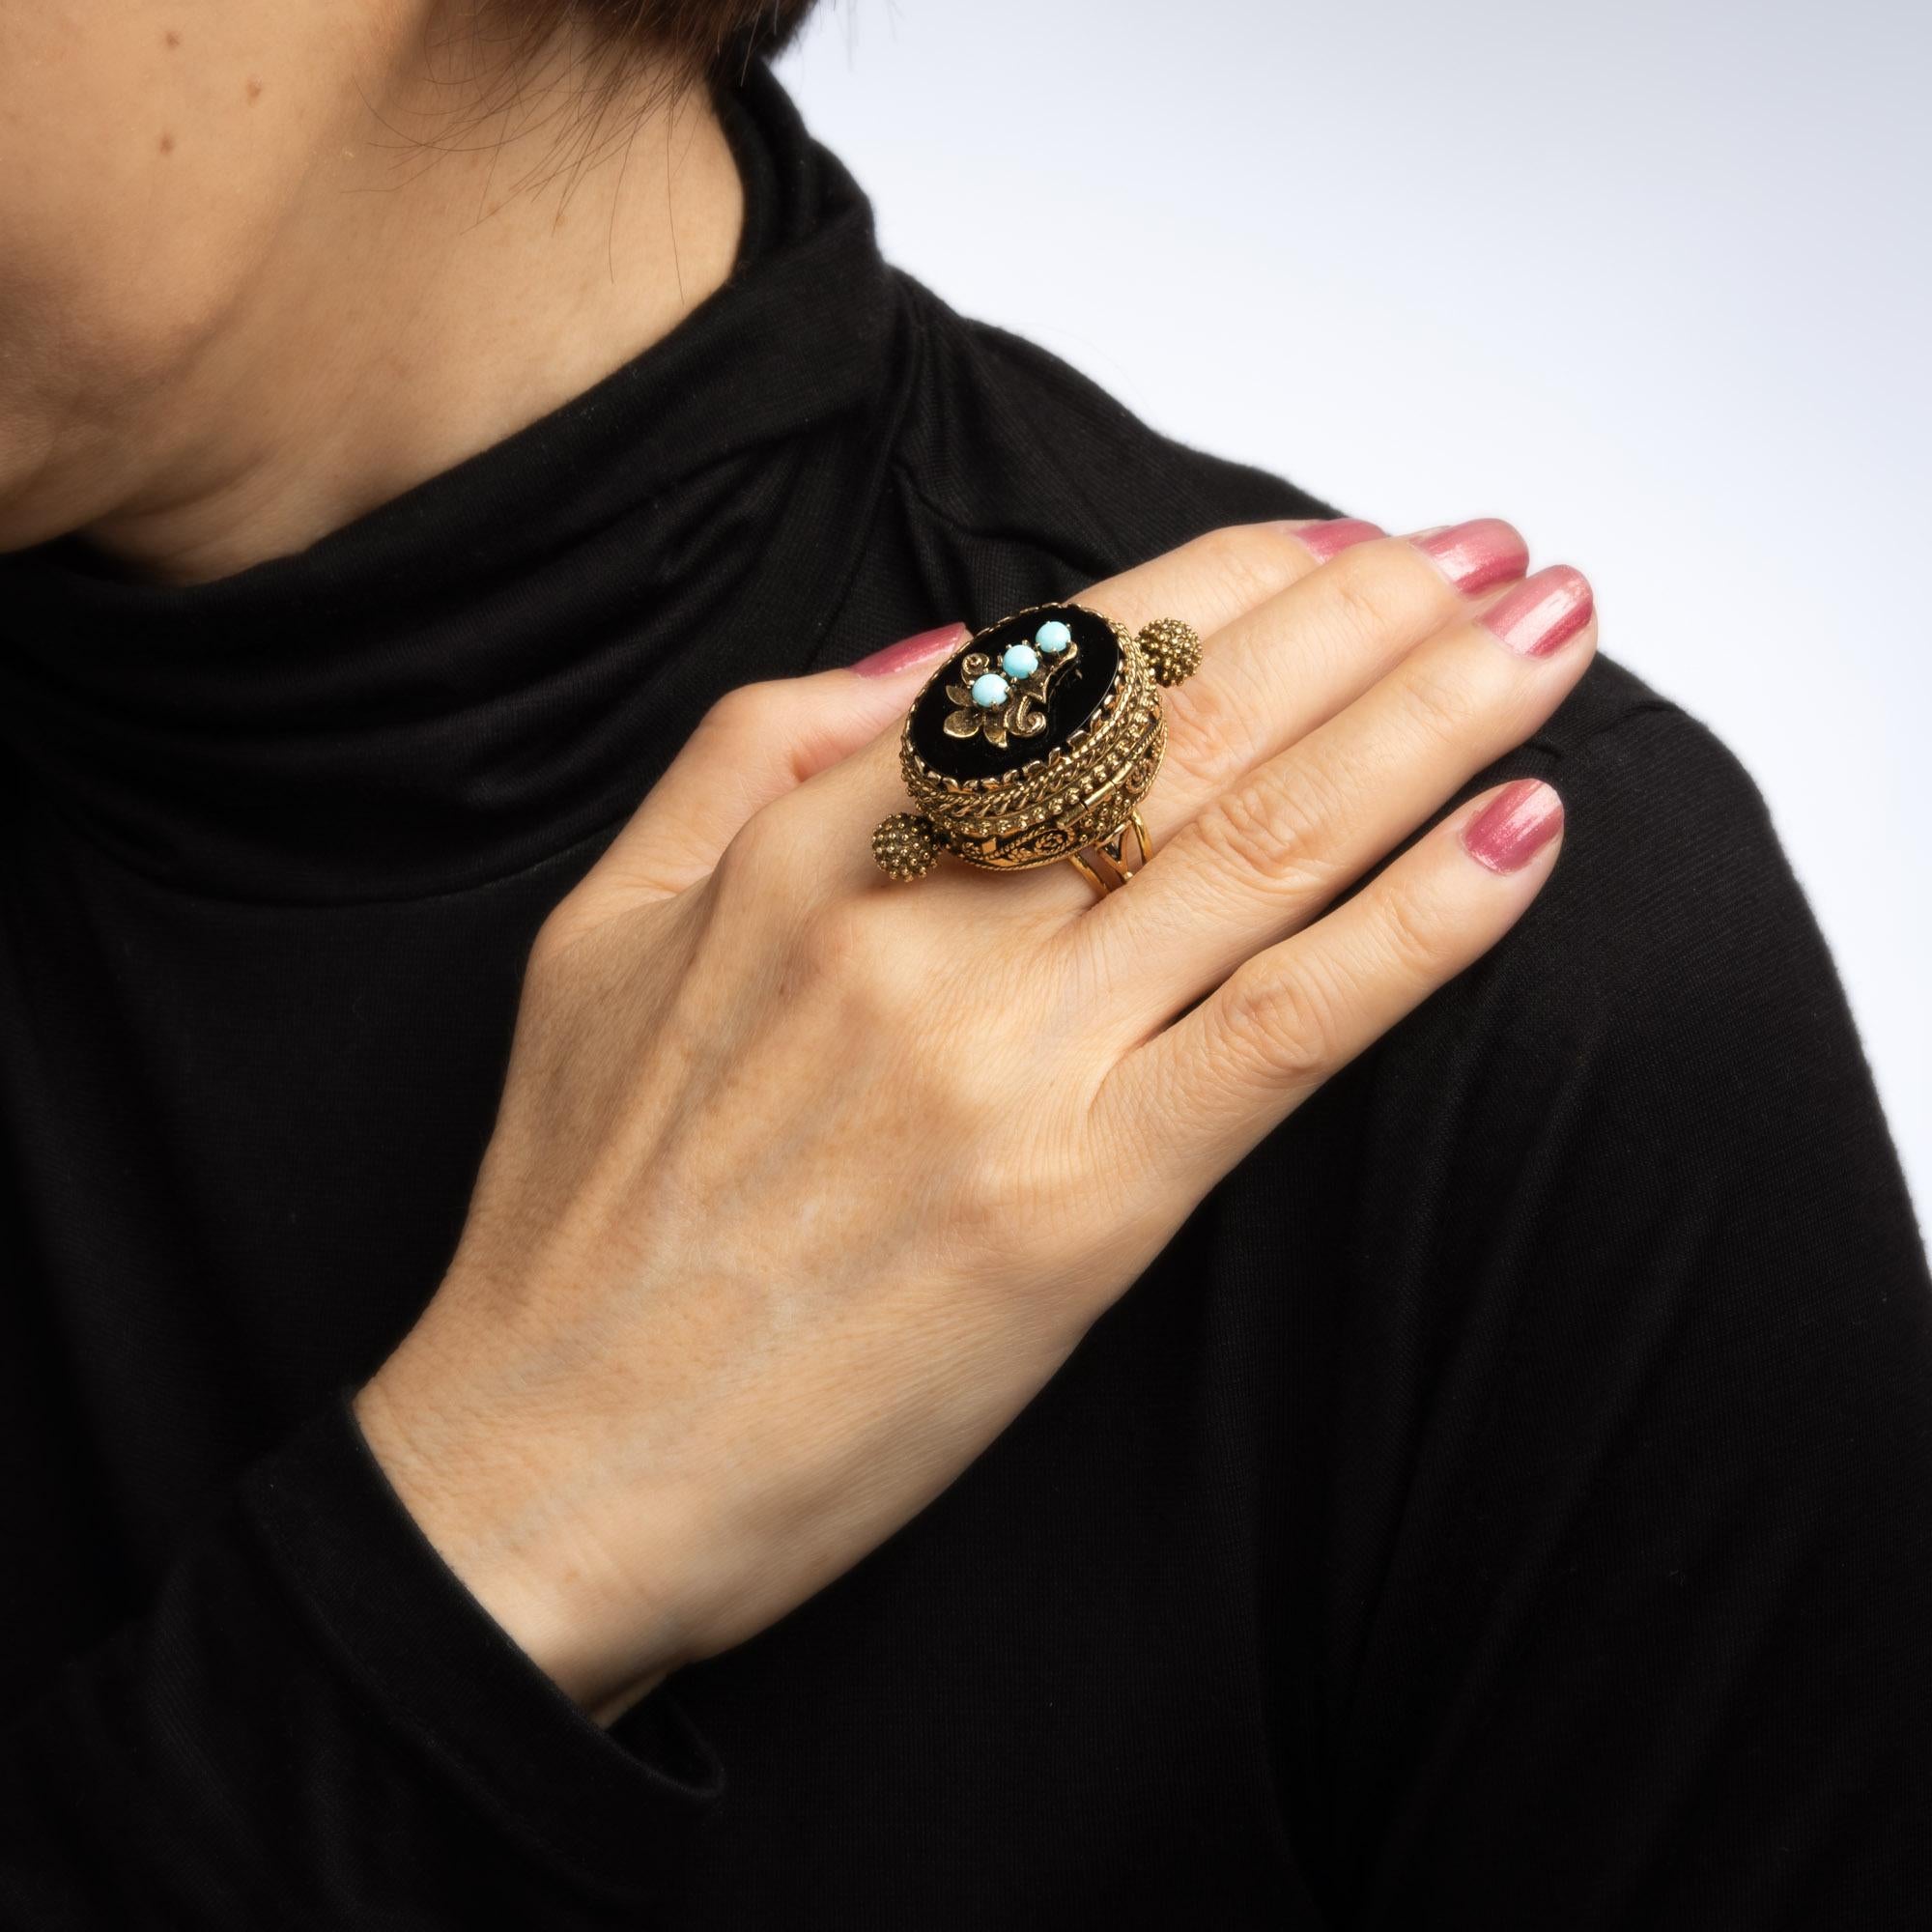 Cabochon Pillbox Ring Vintage 14k Yellow Gold Onyx Jewelry Opens Secret Compartment For Sale